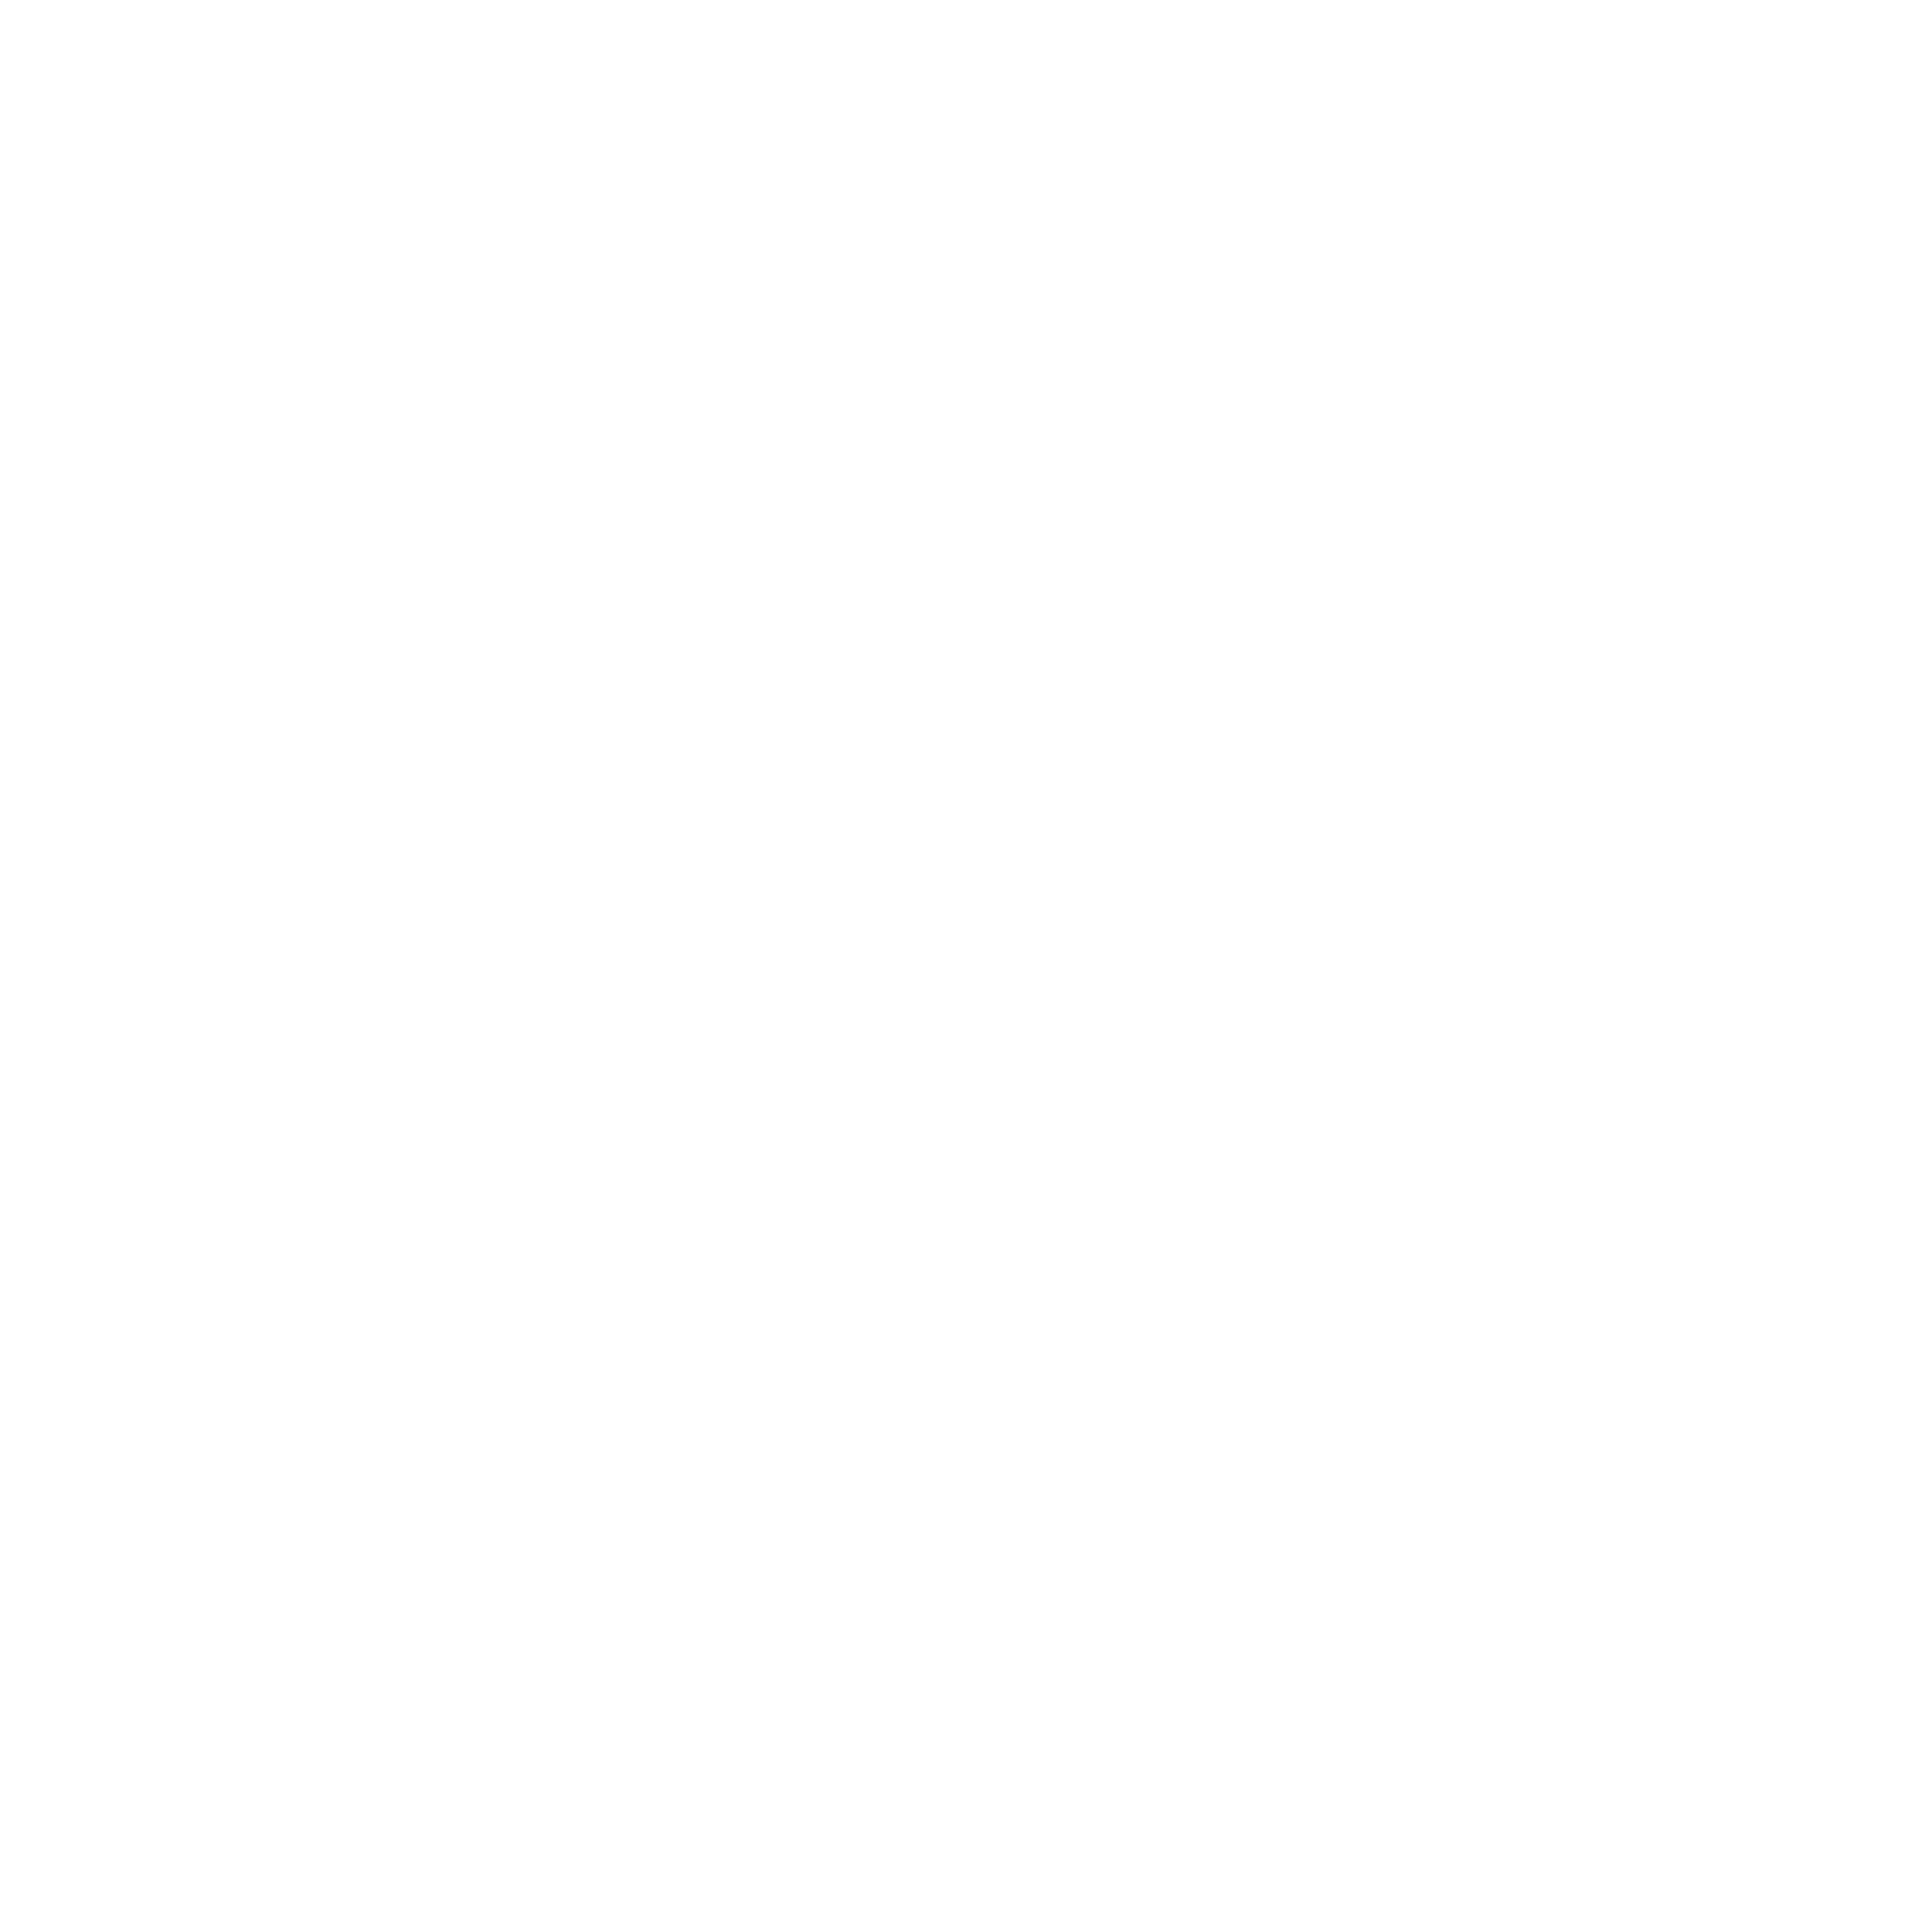 South Africa Surf Tours Logo 2020